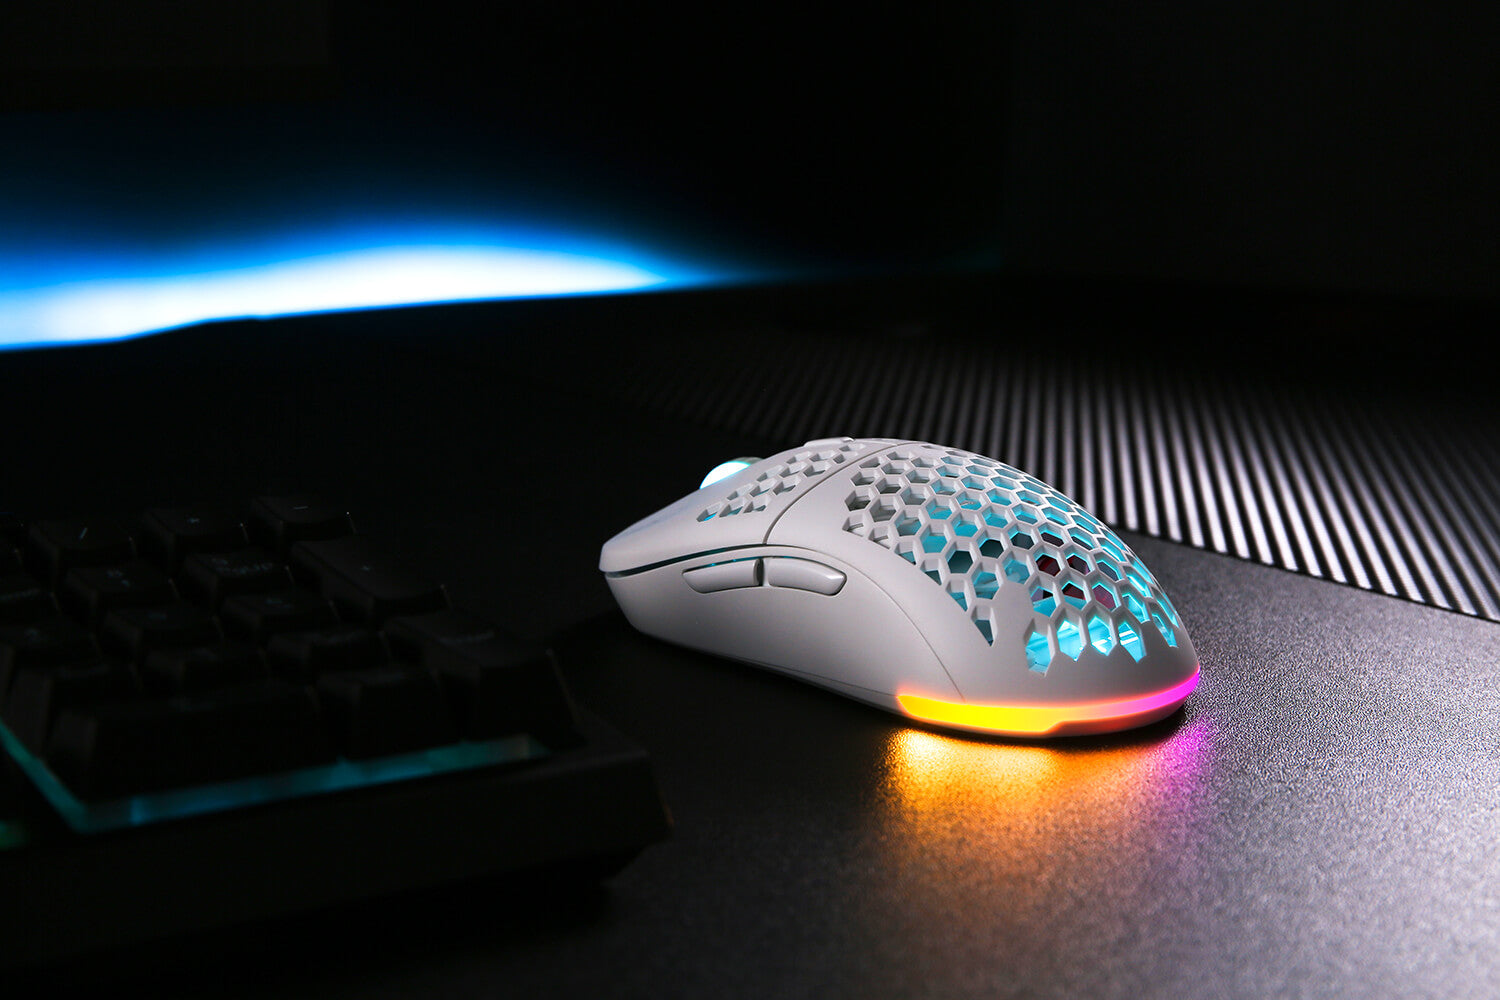 Wireless Ambidextrous Gaming Mouse